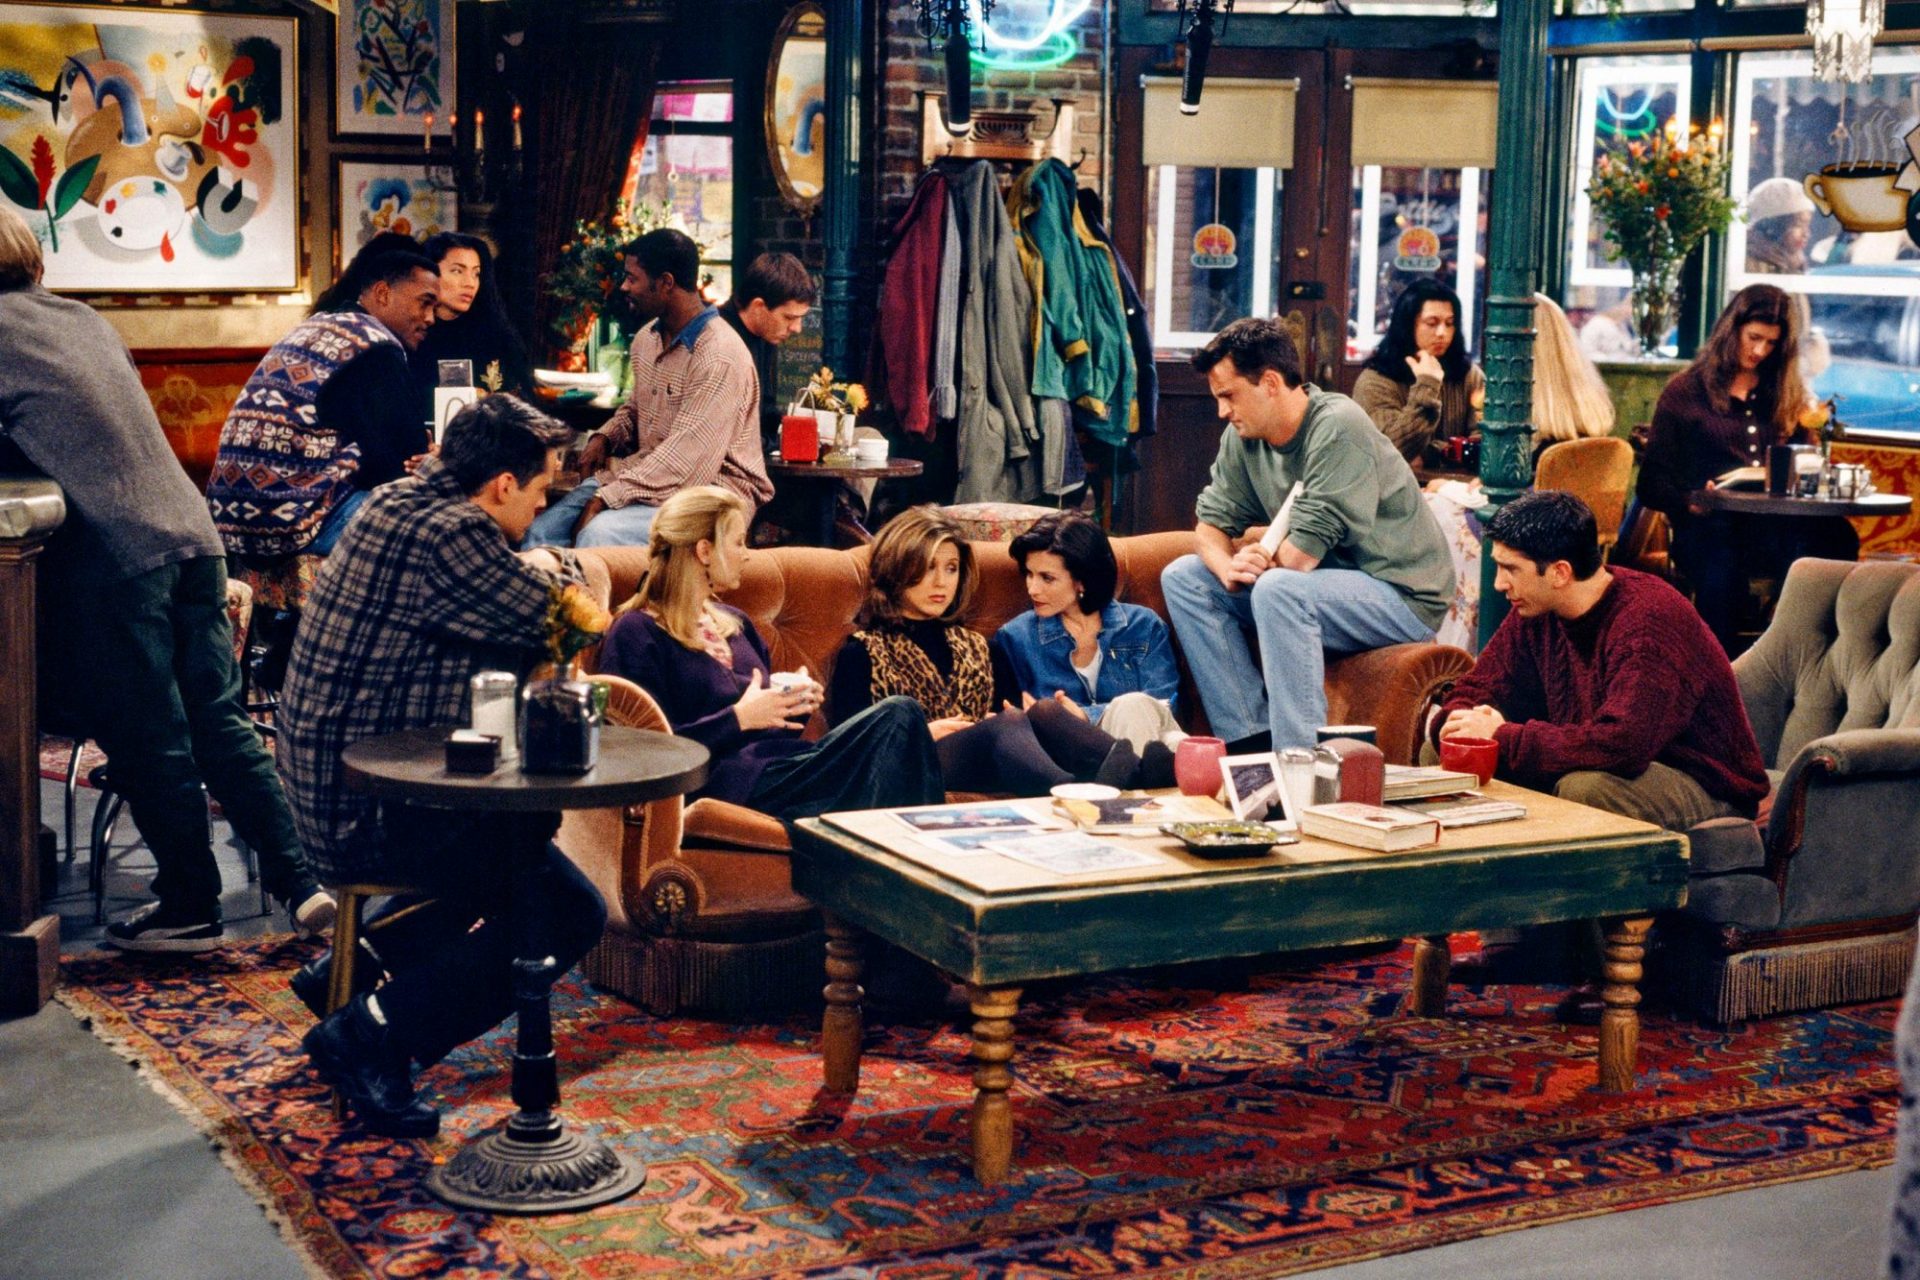 The Best TV Restaurant Hangouts We Wish We Could Visit In Real Life